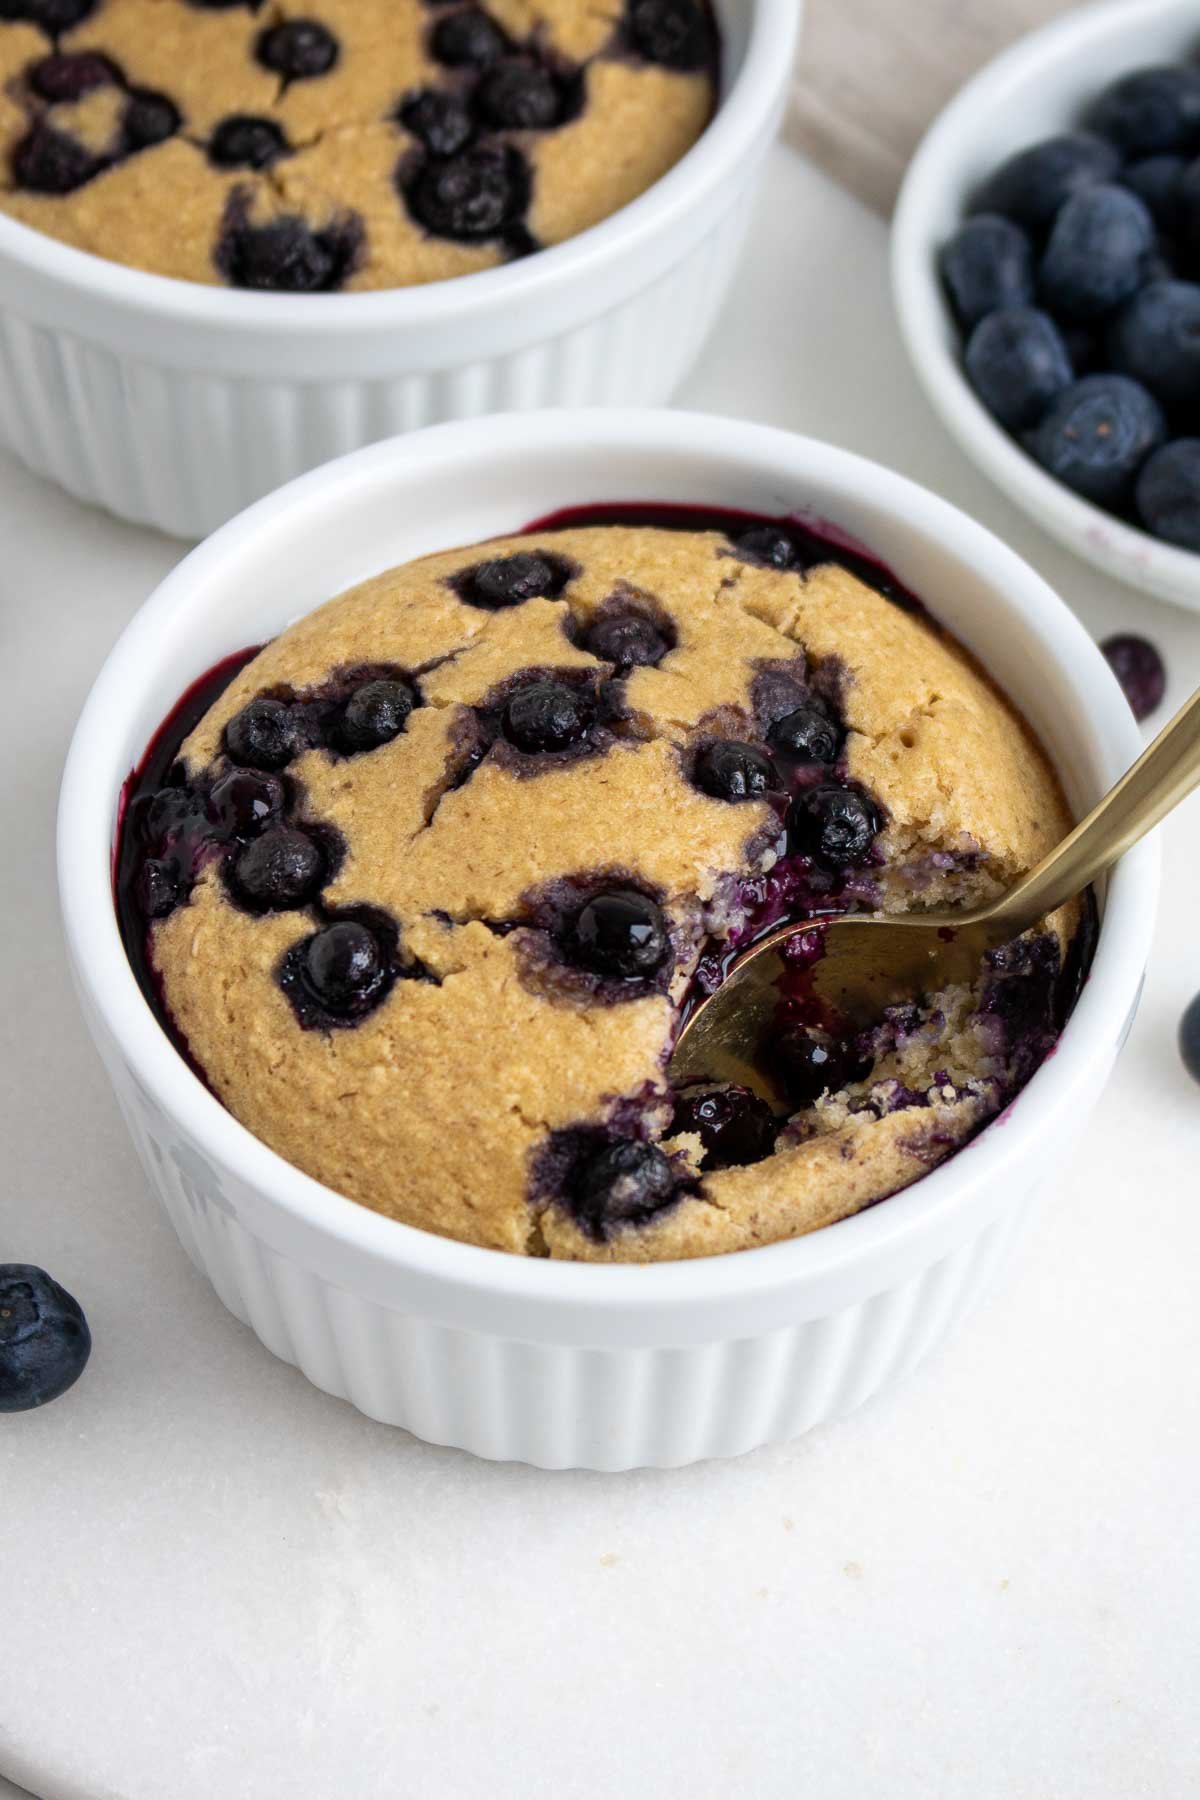 Ramekin with baked blended oats with a spoon